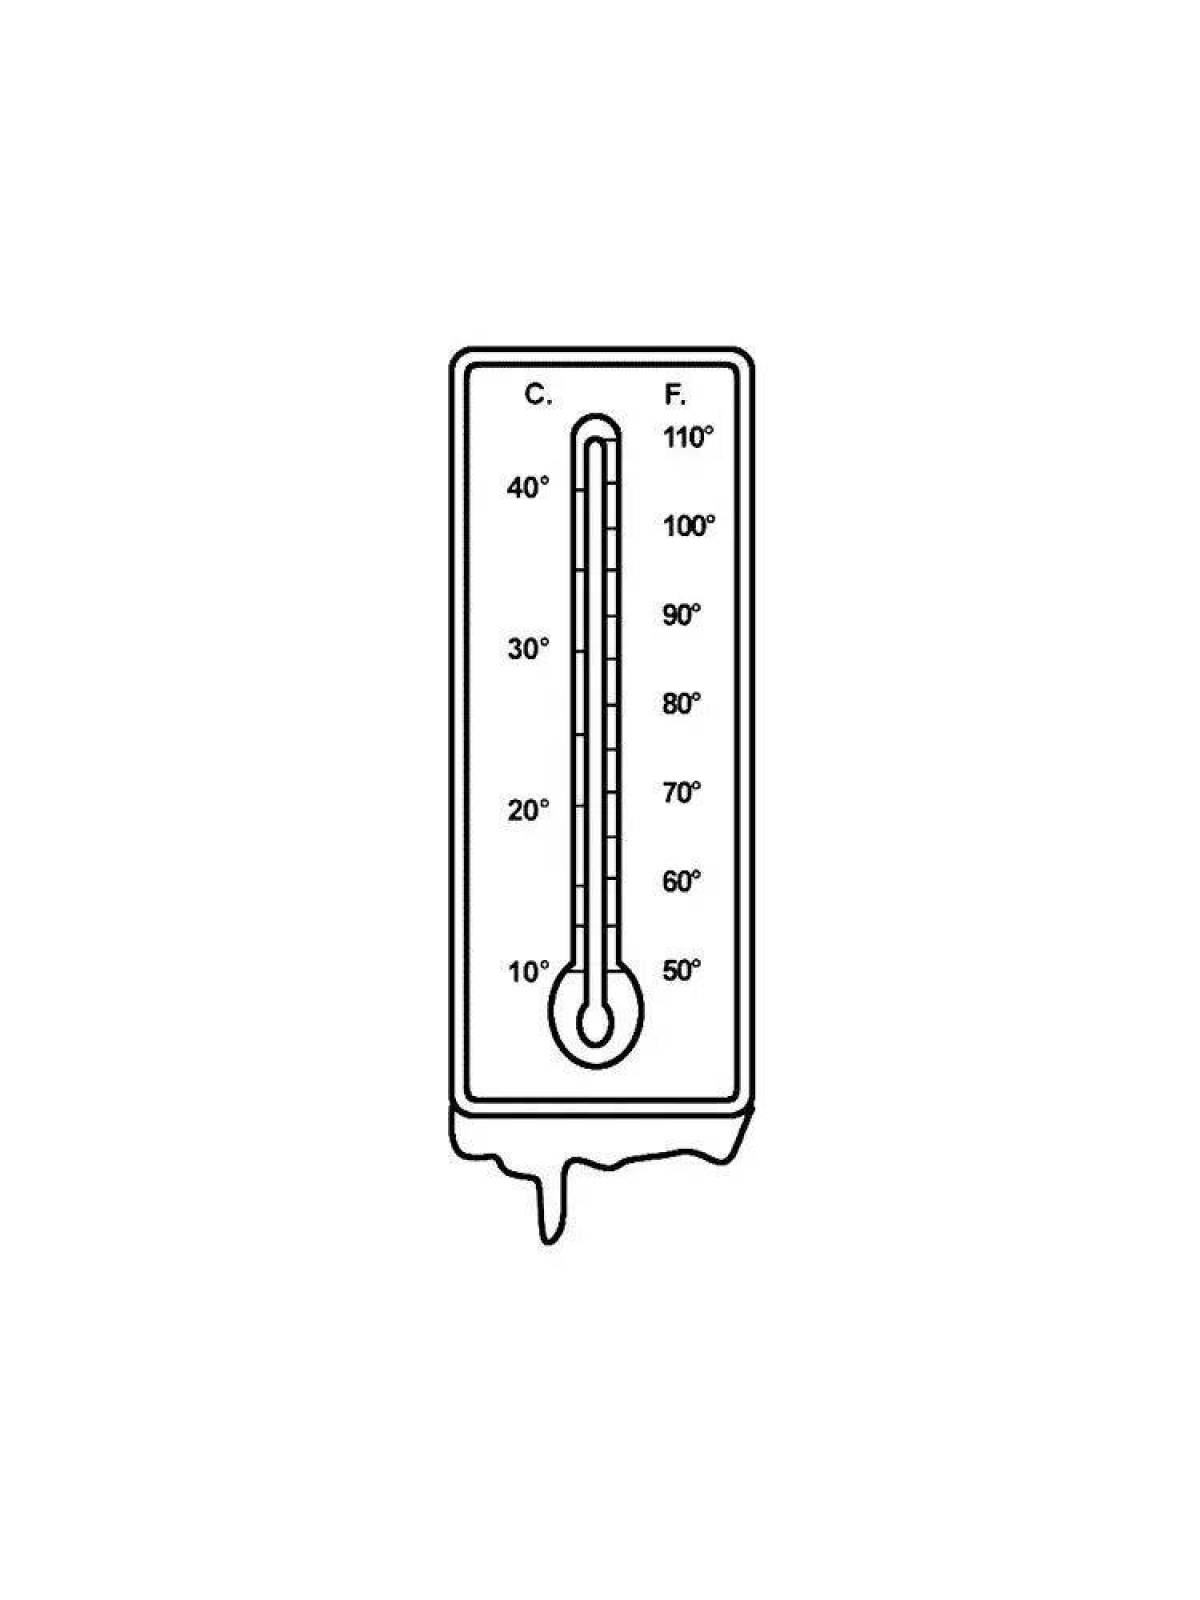 Playful thermometer coloring book